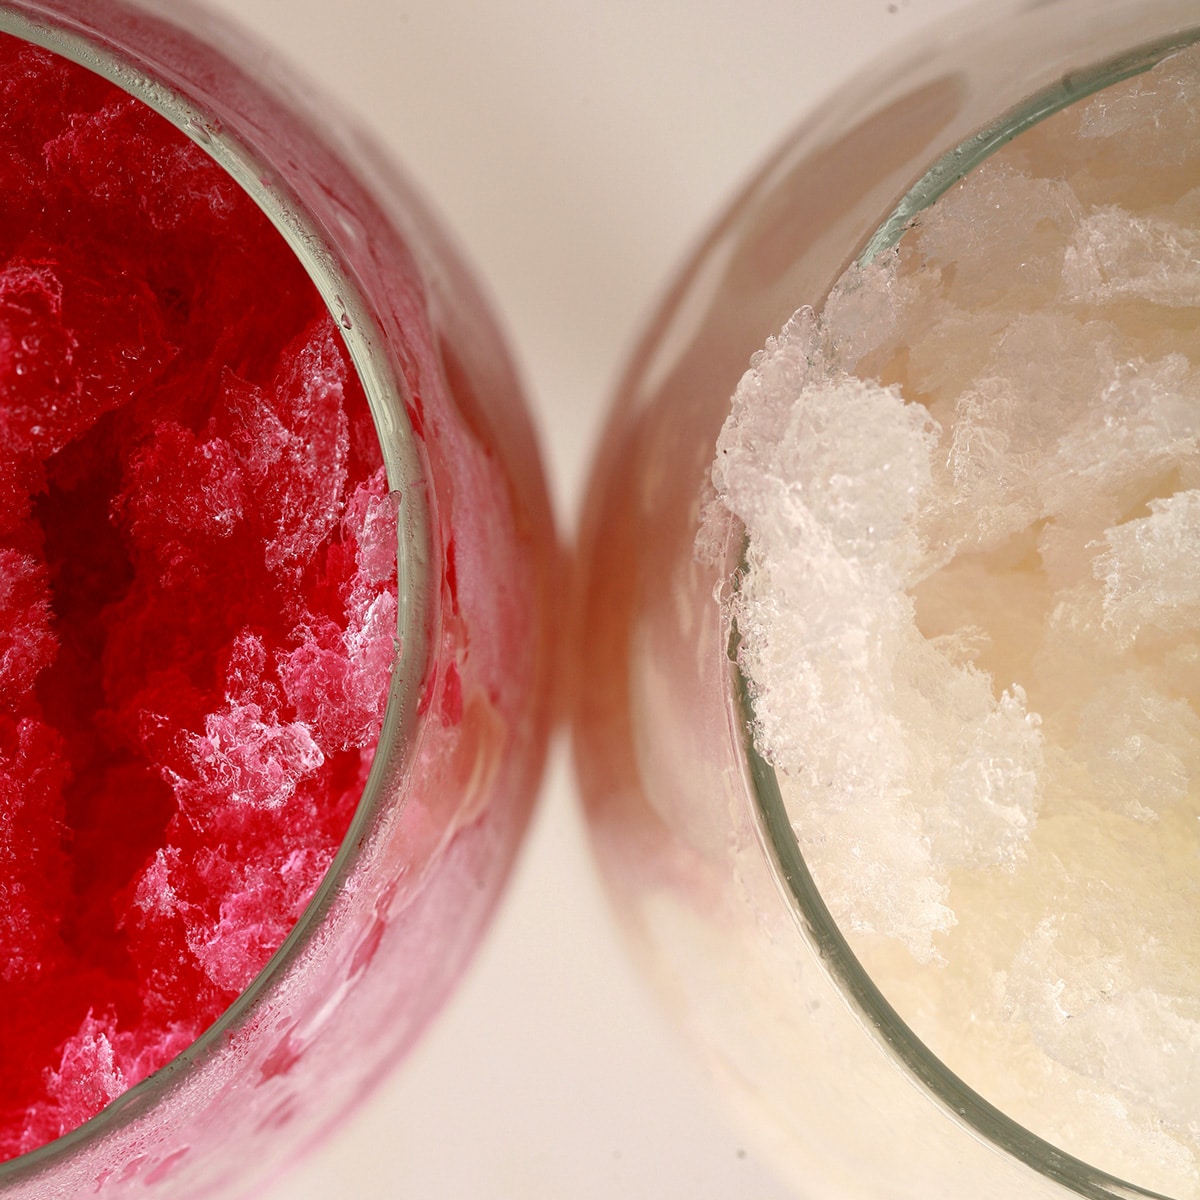 Two frosty wine glasses with wine slush in them - one is made with red wine, the other with white.